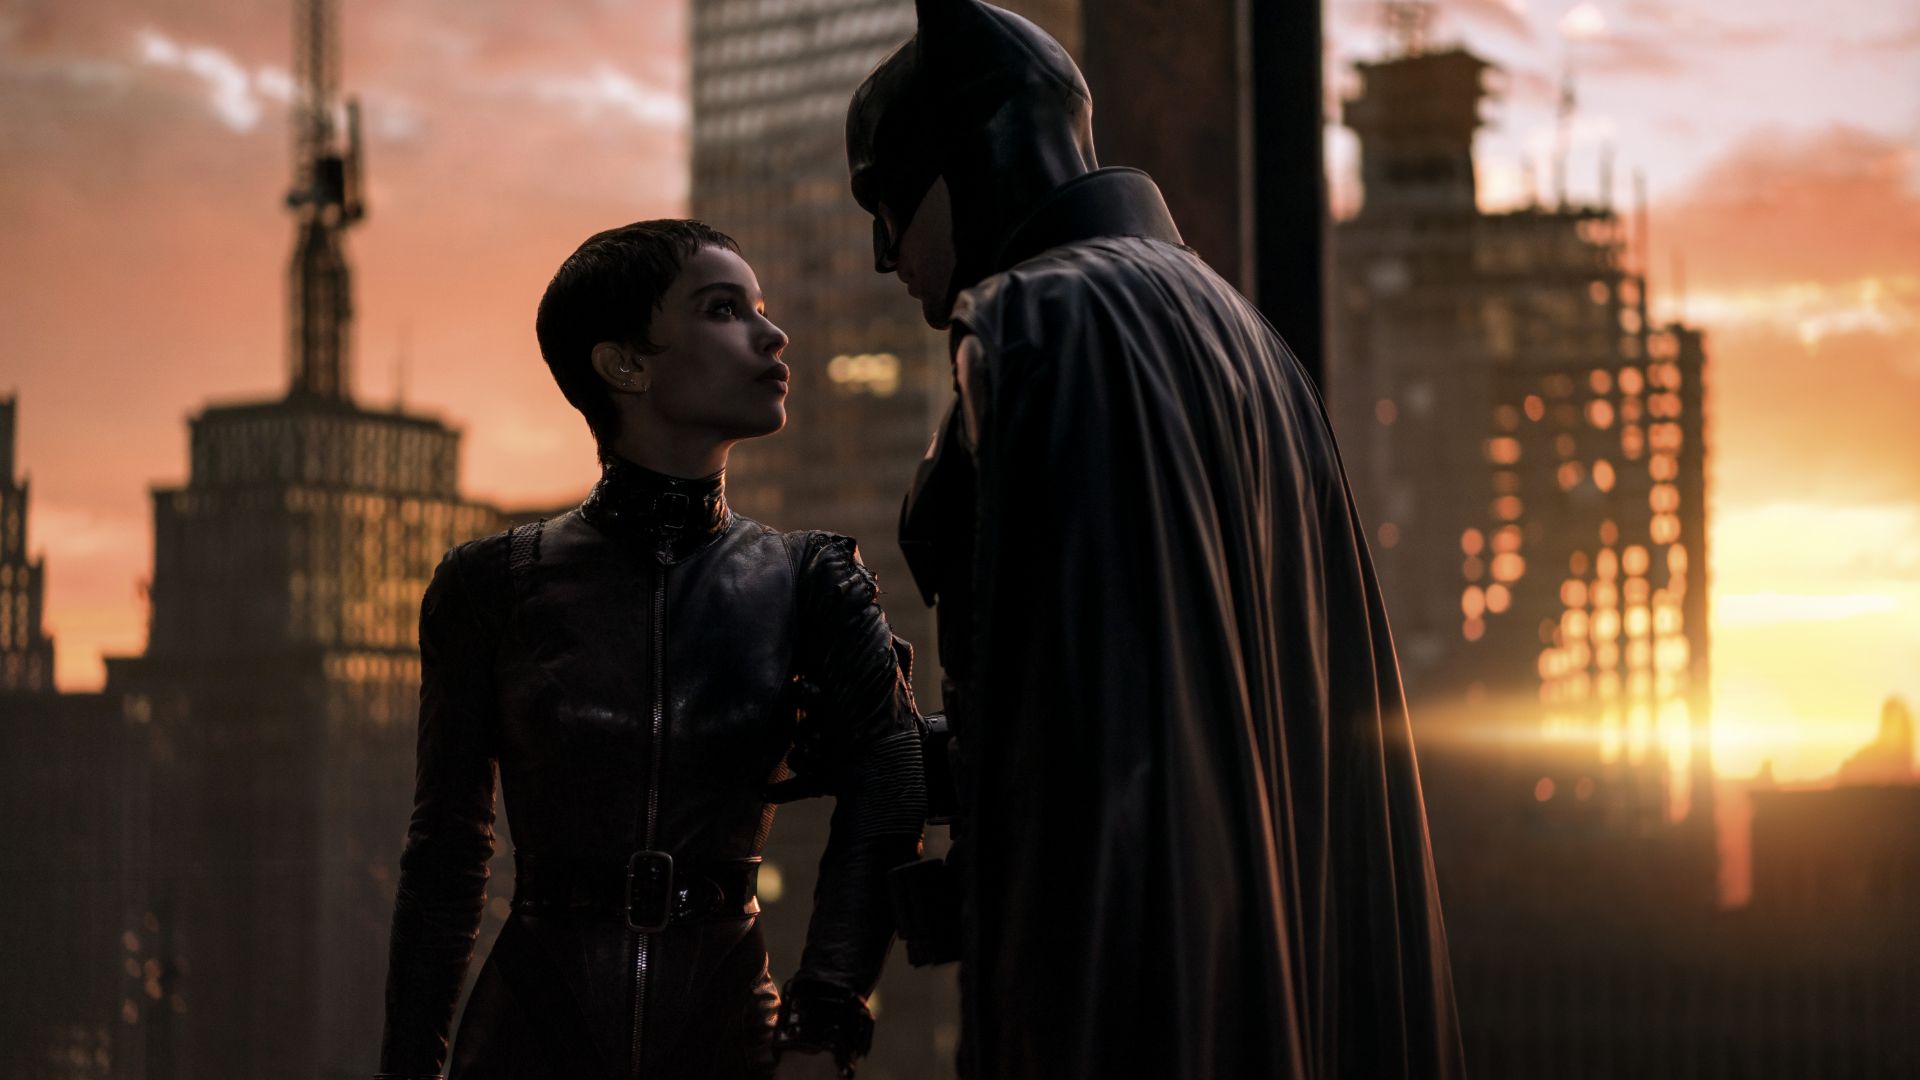 The Batman has another deleted scene and you’ll be able to watch it very soon